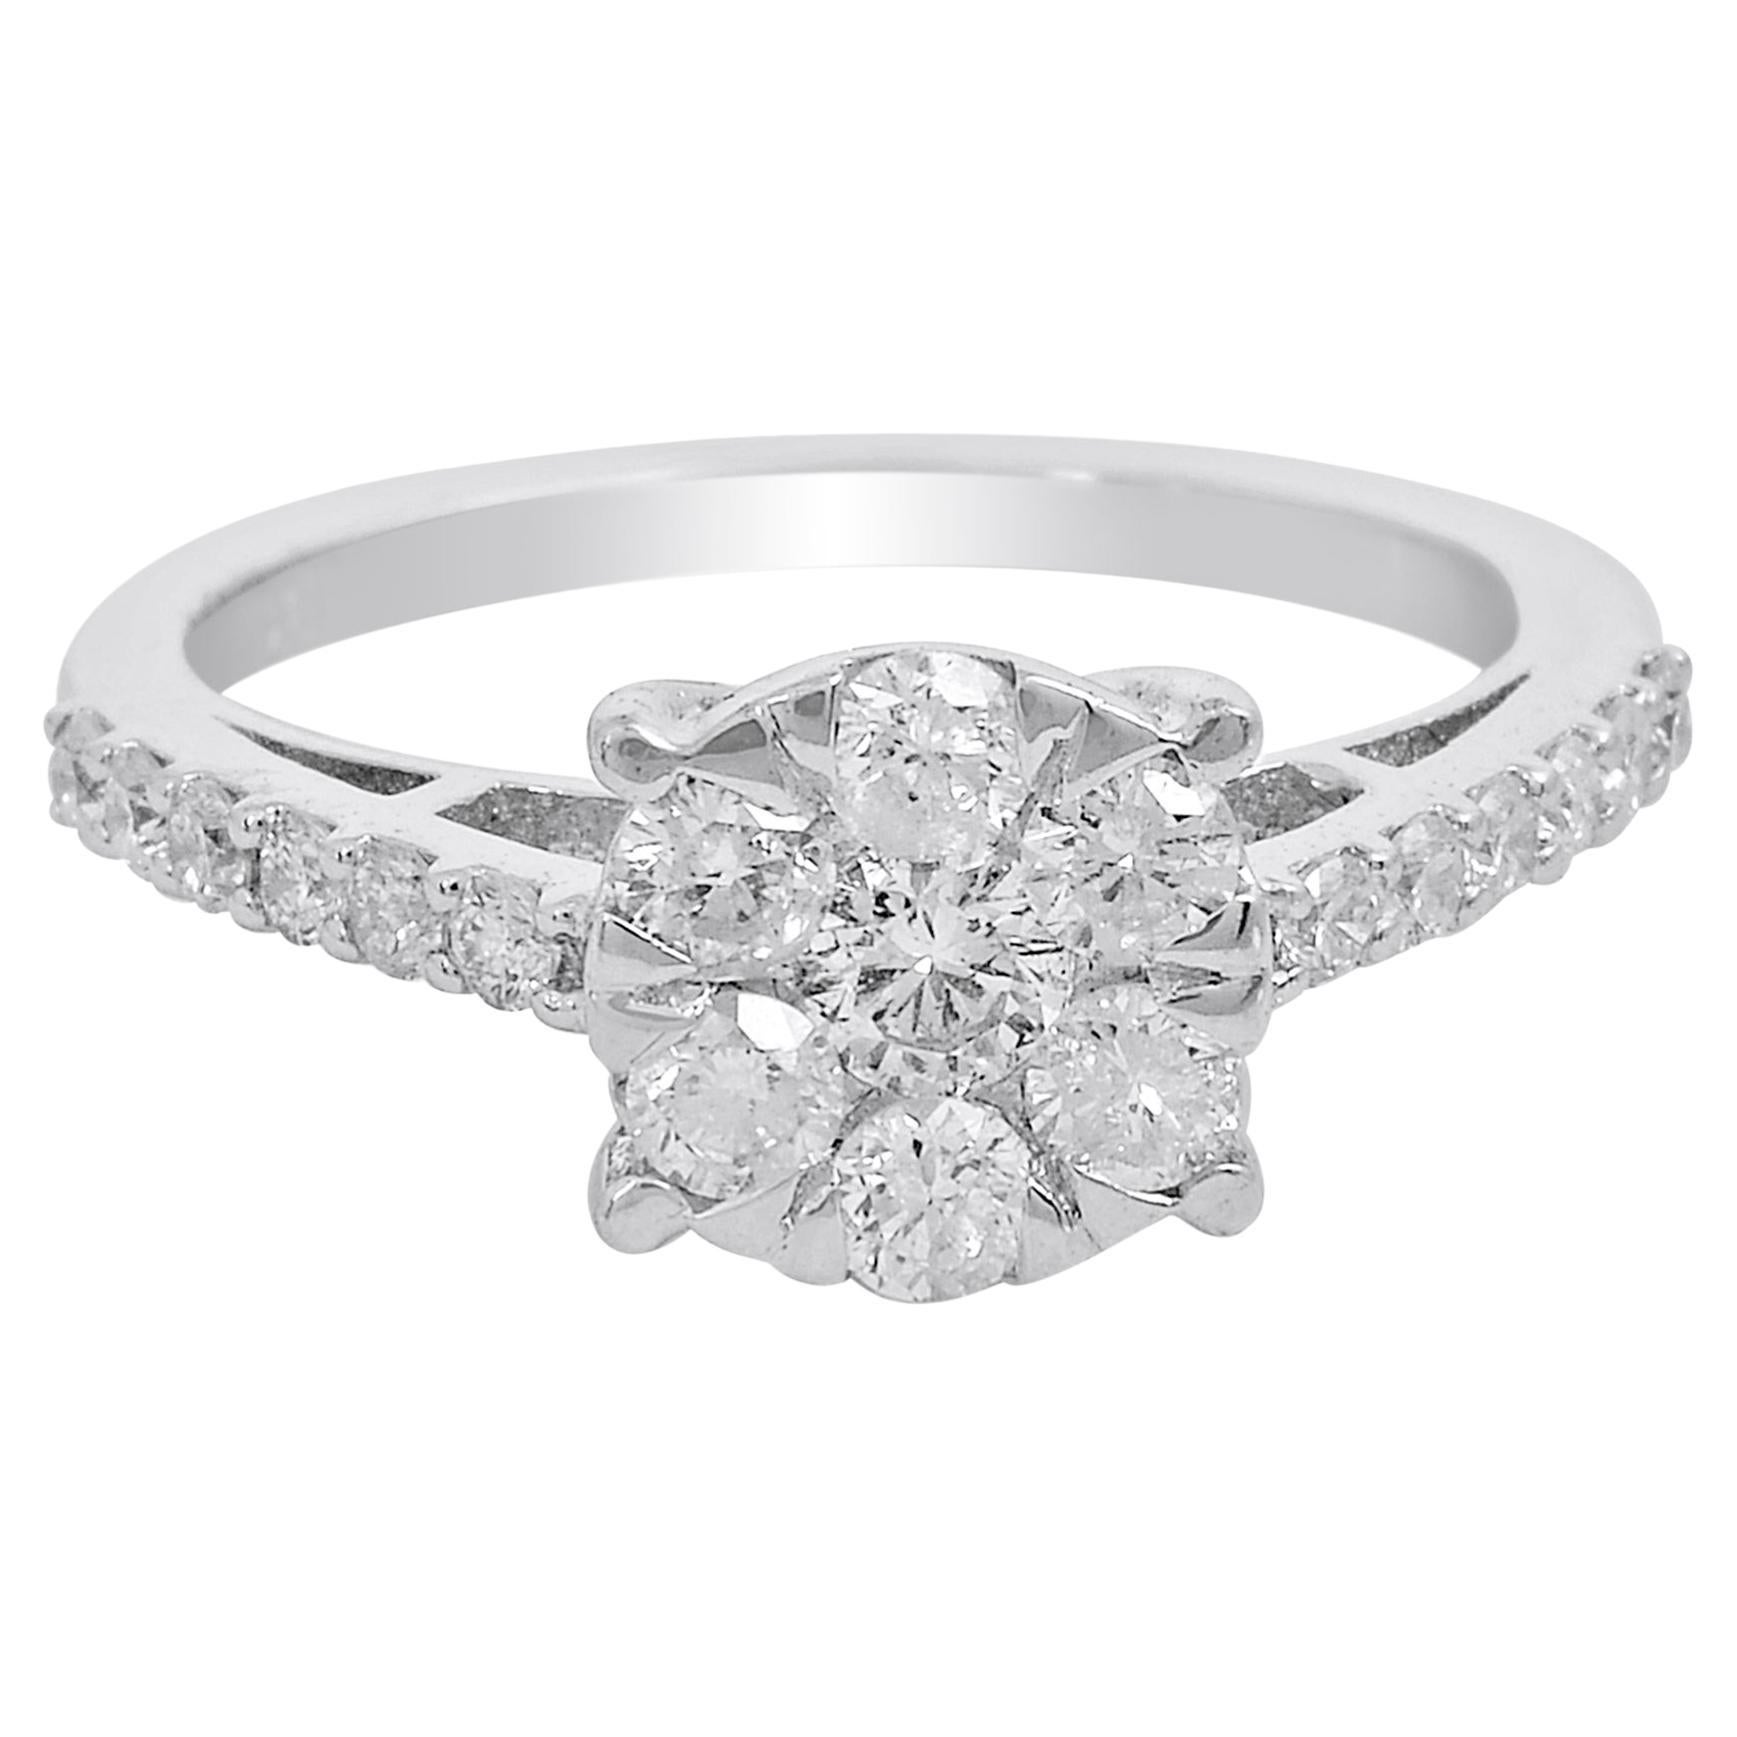 0.95 Carat SI Clarity HI Color Diamond Promise Ring 14 Karat White Gold Jewelry For Sale